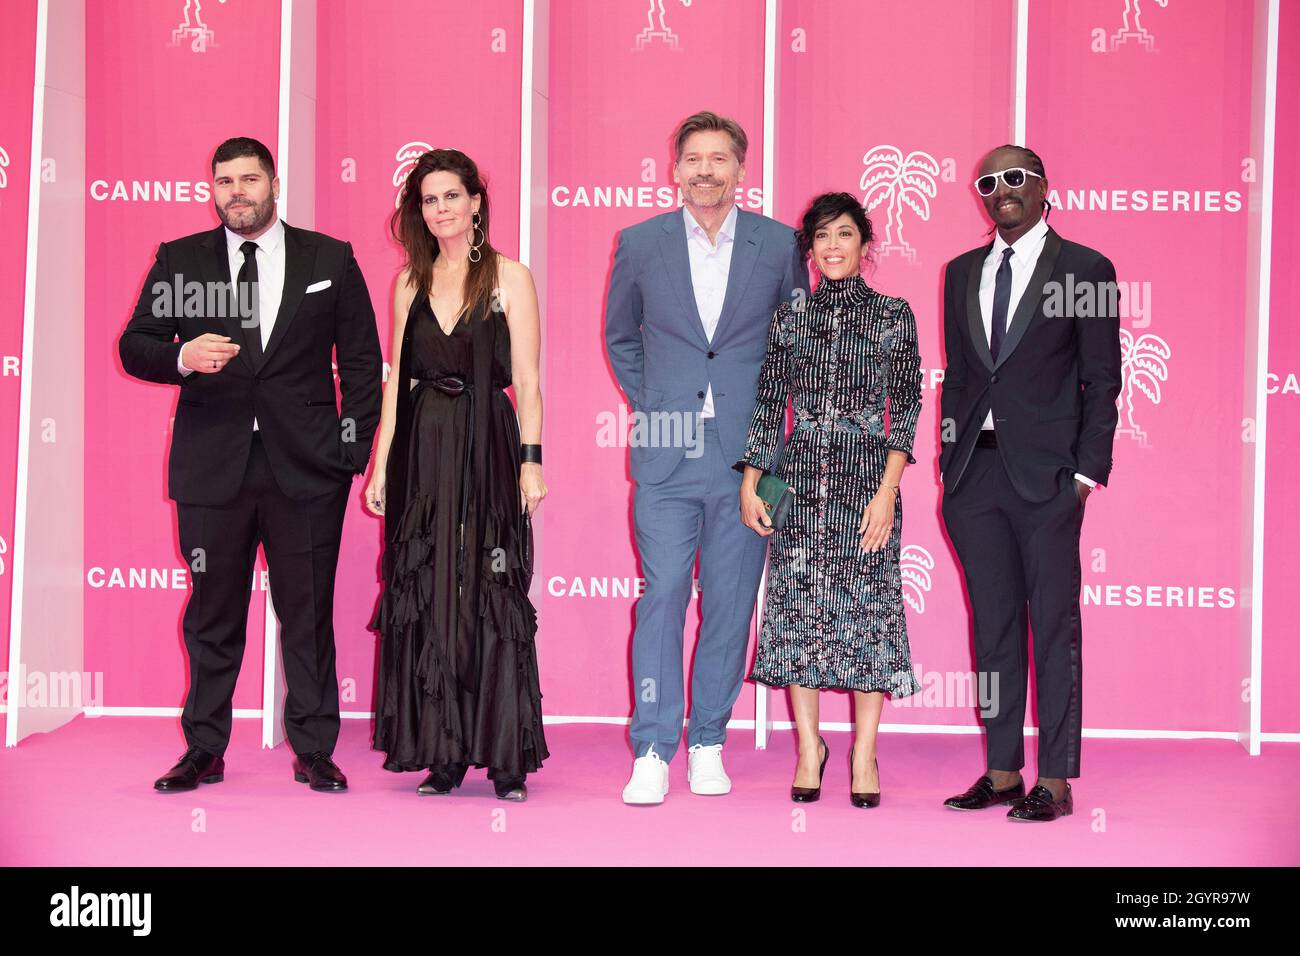 Cannes, France. 09th Oct, 2021. Italian actor and Canneseries jury member Salvatore Esposito, Israeli writer and Canneseries jury member Sigal Avin, Danish actor, screenwriter and producer and Canneseries jury president Nicolaj Coster-Waldau, French actress and Canneseries jury member Naidra Ayadi and French musician composer and actor and Canneseries jury member Marco Prince attend the opening ceremony of 4th edition of the Cannes International Series Festival (Canneseries) in Cannes, southern France, on October 8, 2021. Photo by David Niviere/ABACAPRESS.COM Credit: Abaca Press/Alamy Live New Stock Photo